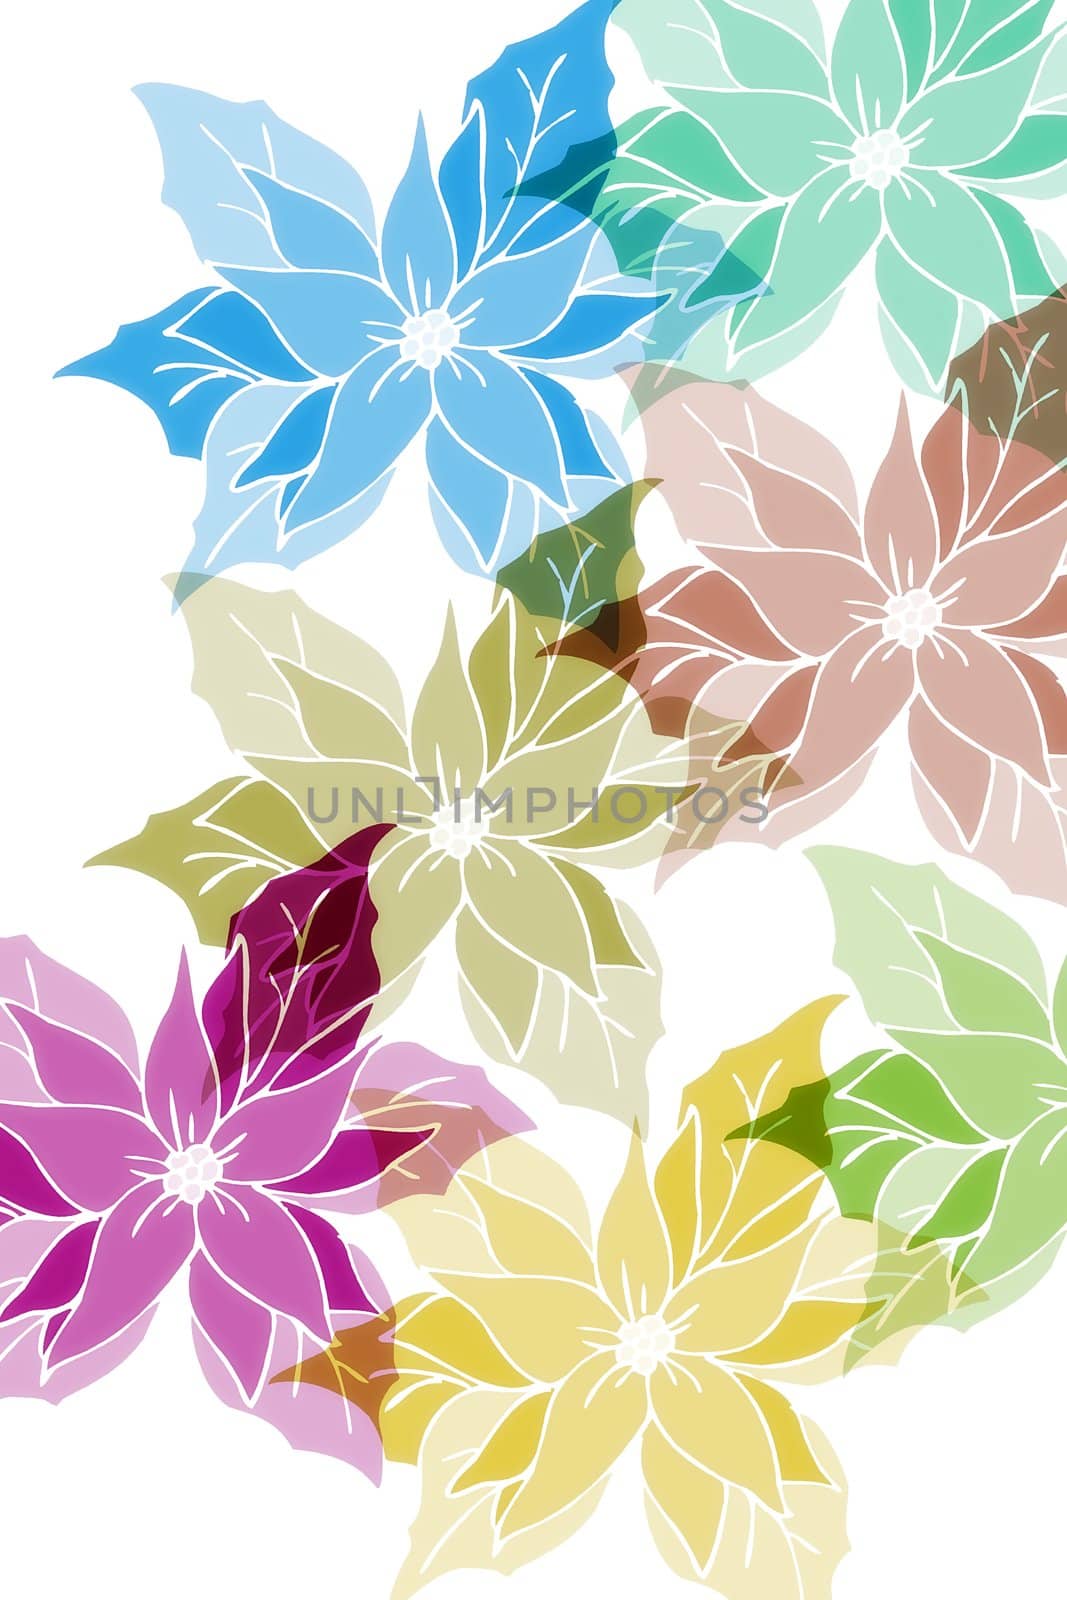 Christmas Roses in bright colors on white background